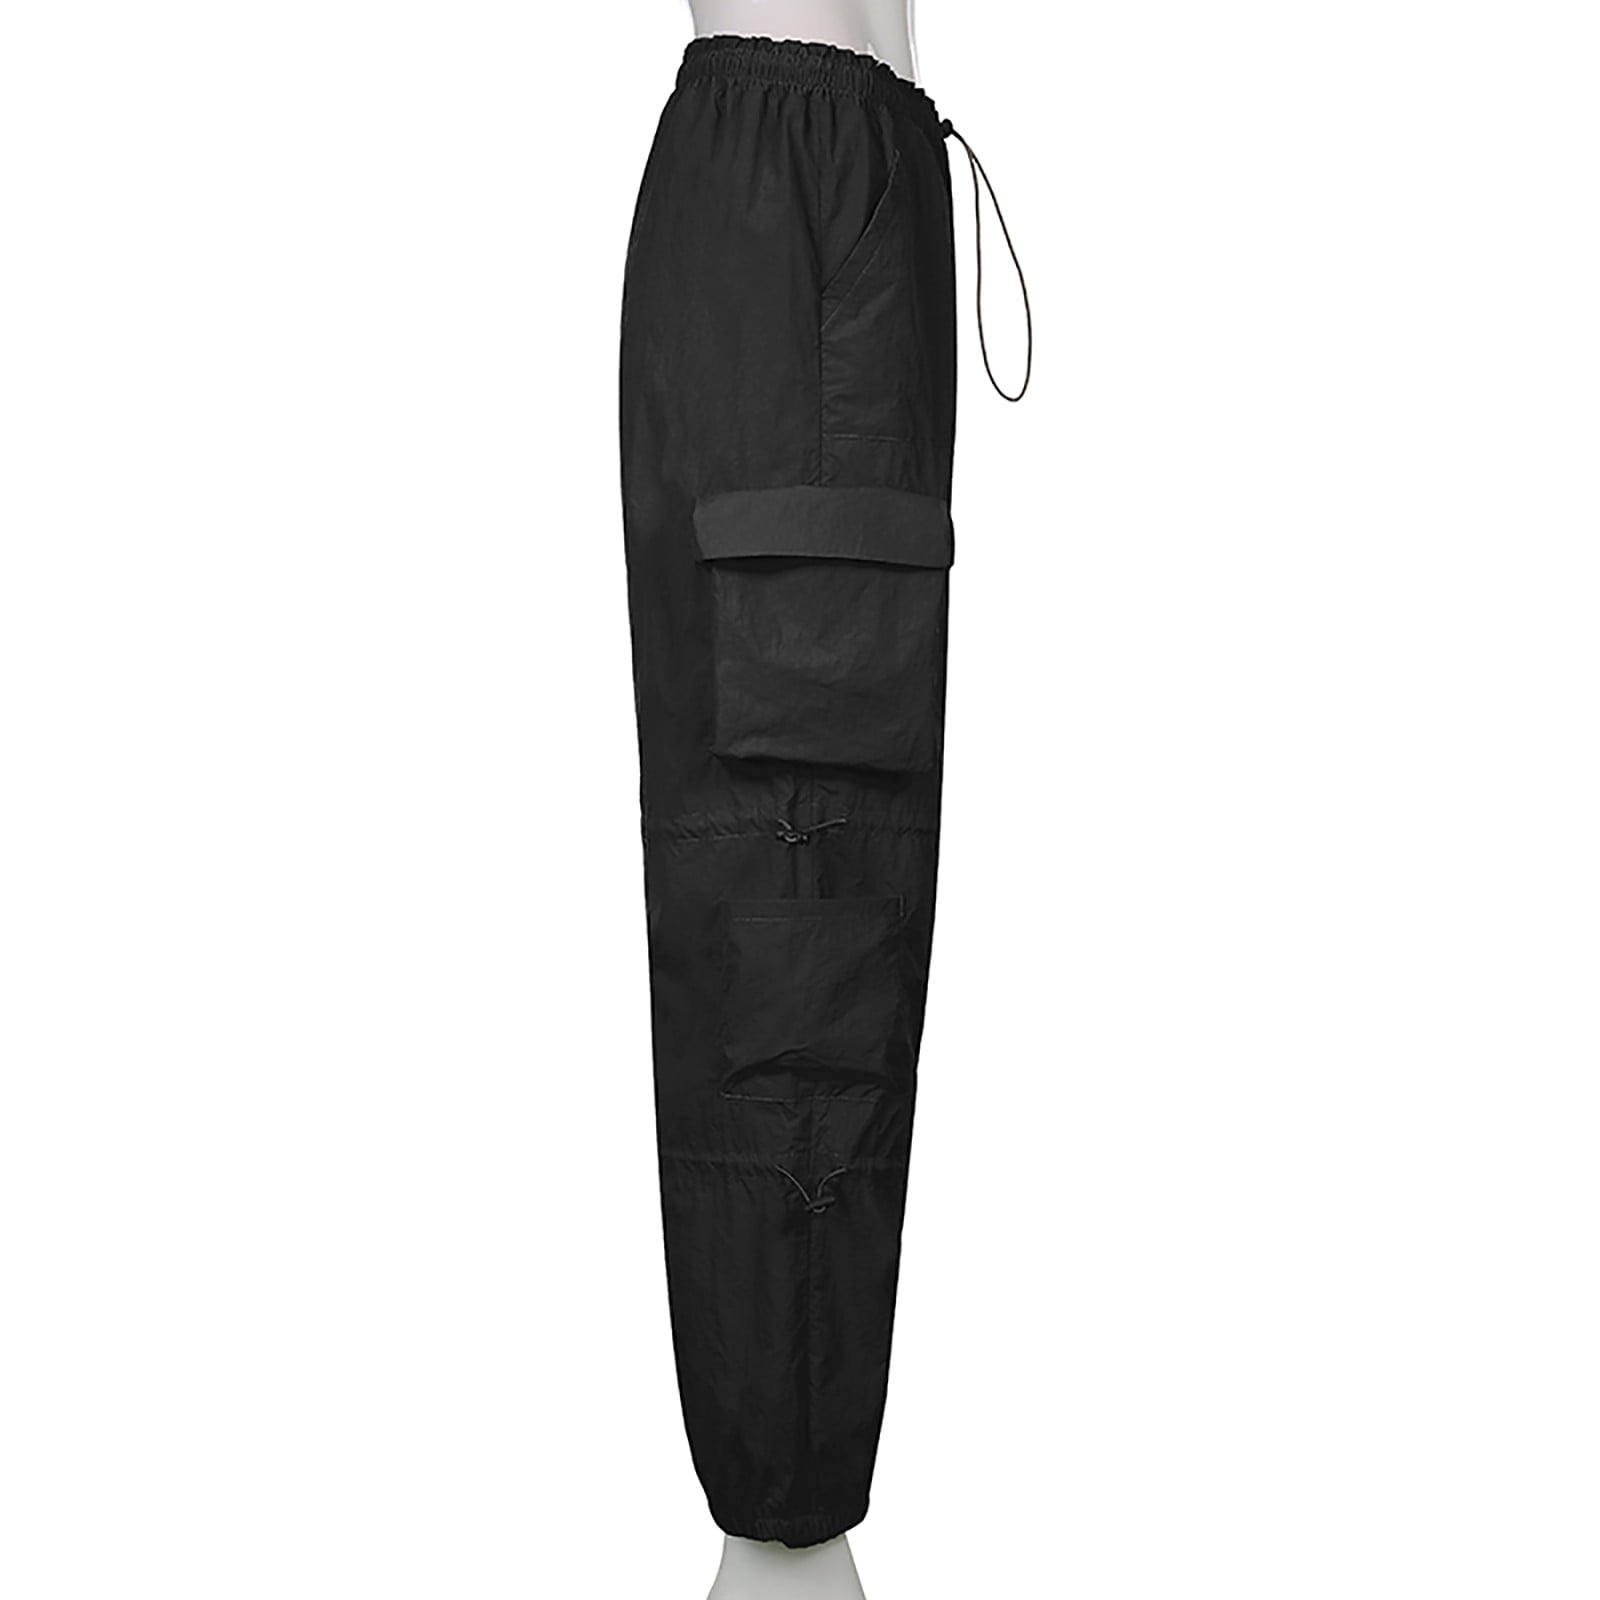  SOIATOT Womens Parachute Cargo Pants Lightweight Hiking Travel  Pants Adjustable Elastic Waist with Drawstring Quick Dry, Black XS :  Clothing, Shoes & Jewelry